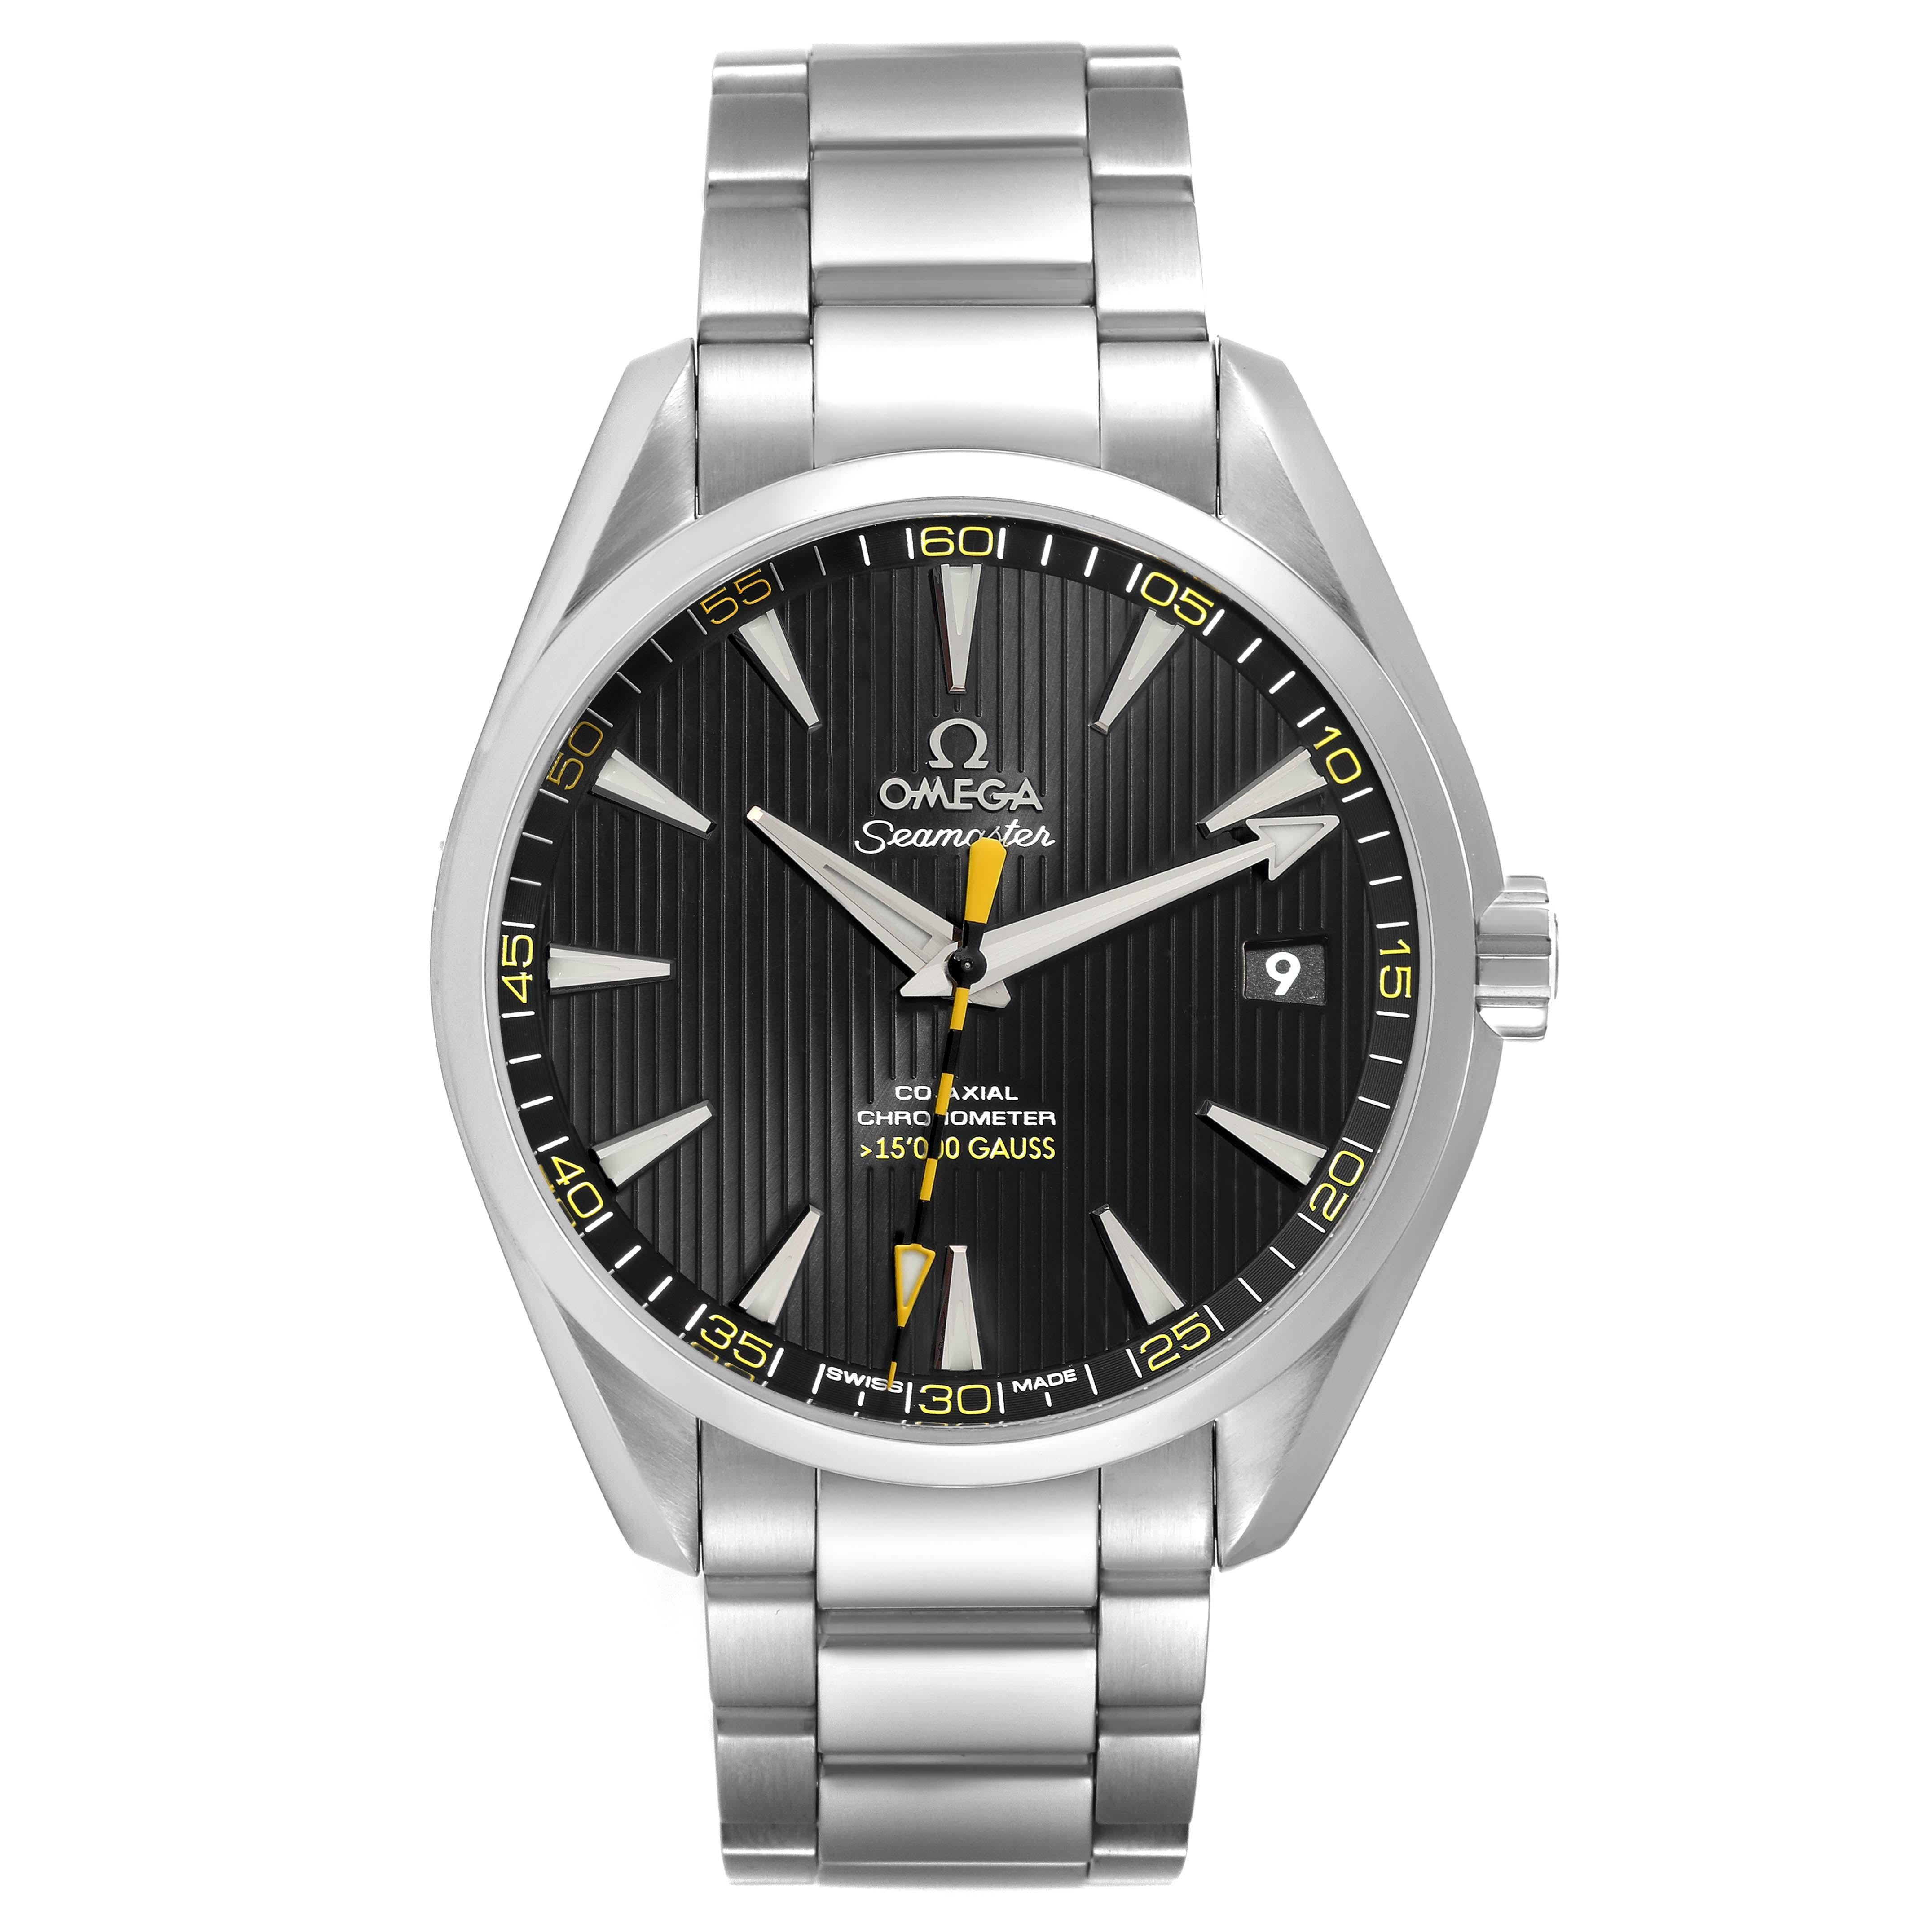 Omega Seamaster Aqua Terra Steel Mens Watch 231.10.42.21.01.002. Automatic self-winding movement with anti-magnetic Co-Axial Escapement. Caliber 8508. Free sprung-balance, 2 barrels mounted in series, automatic winding in both directions. Blackened